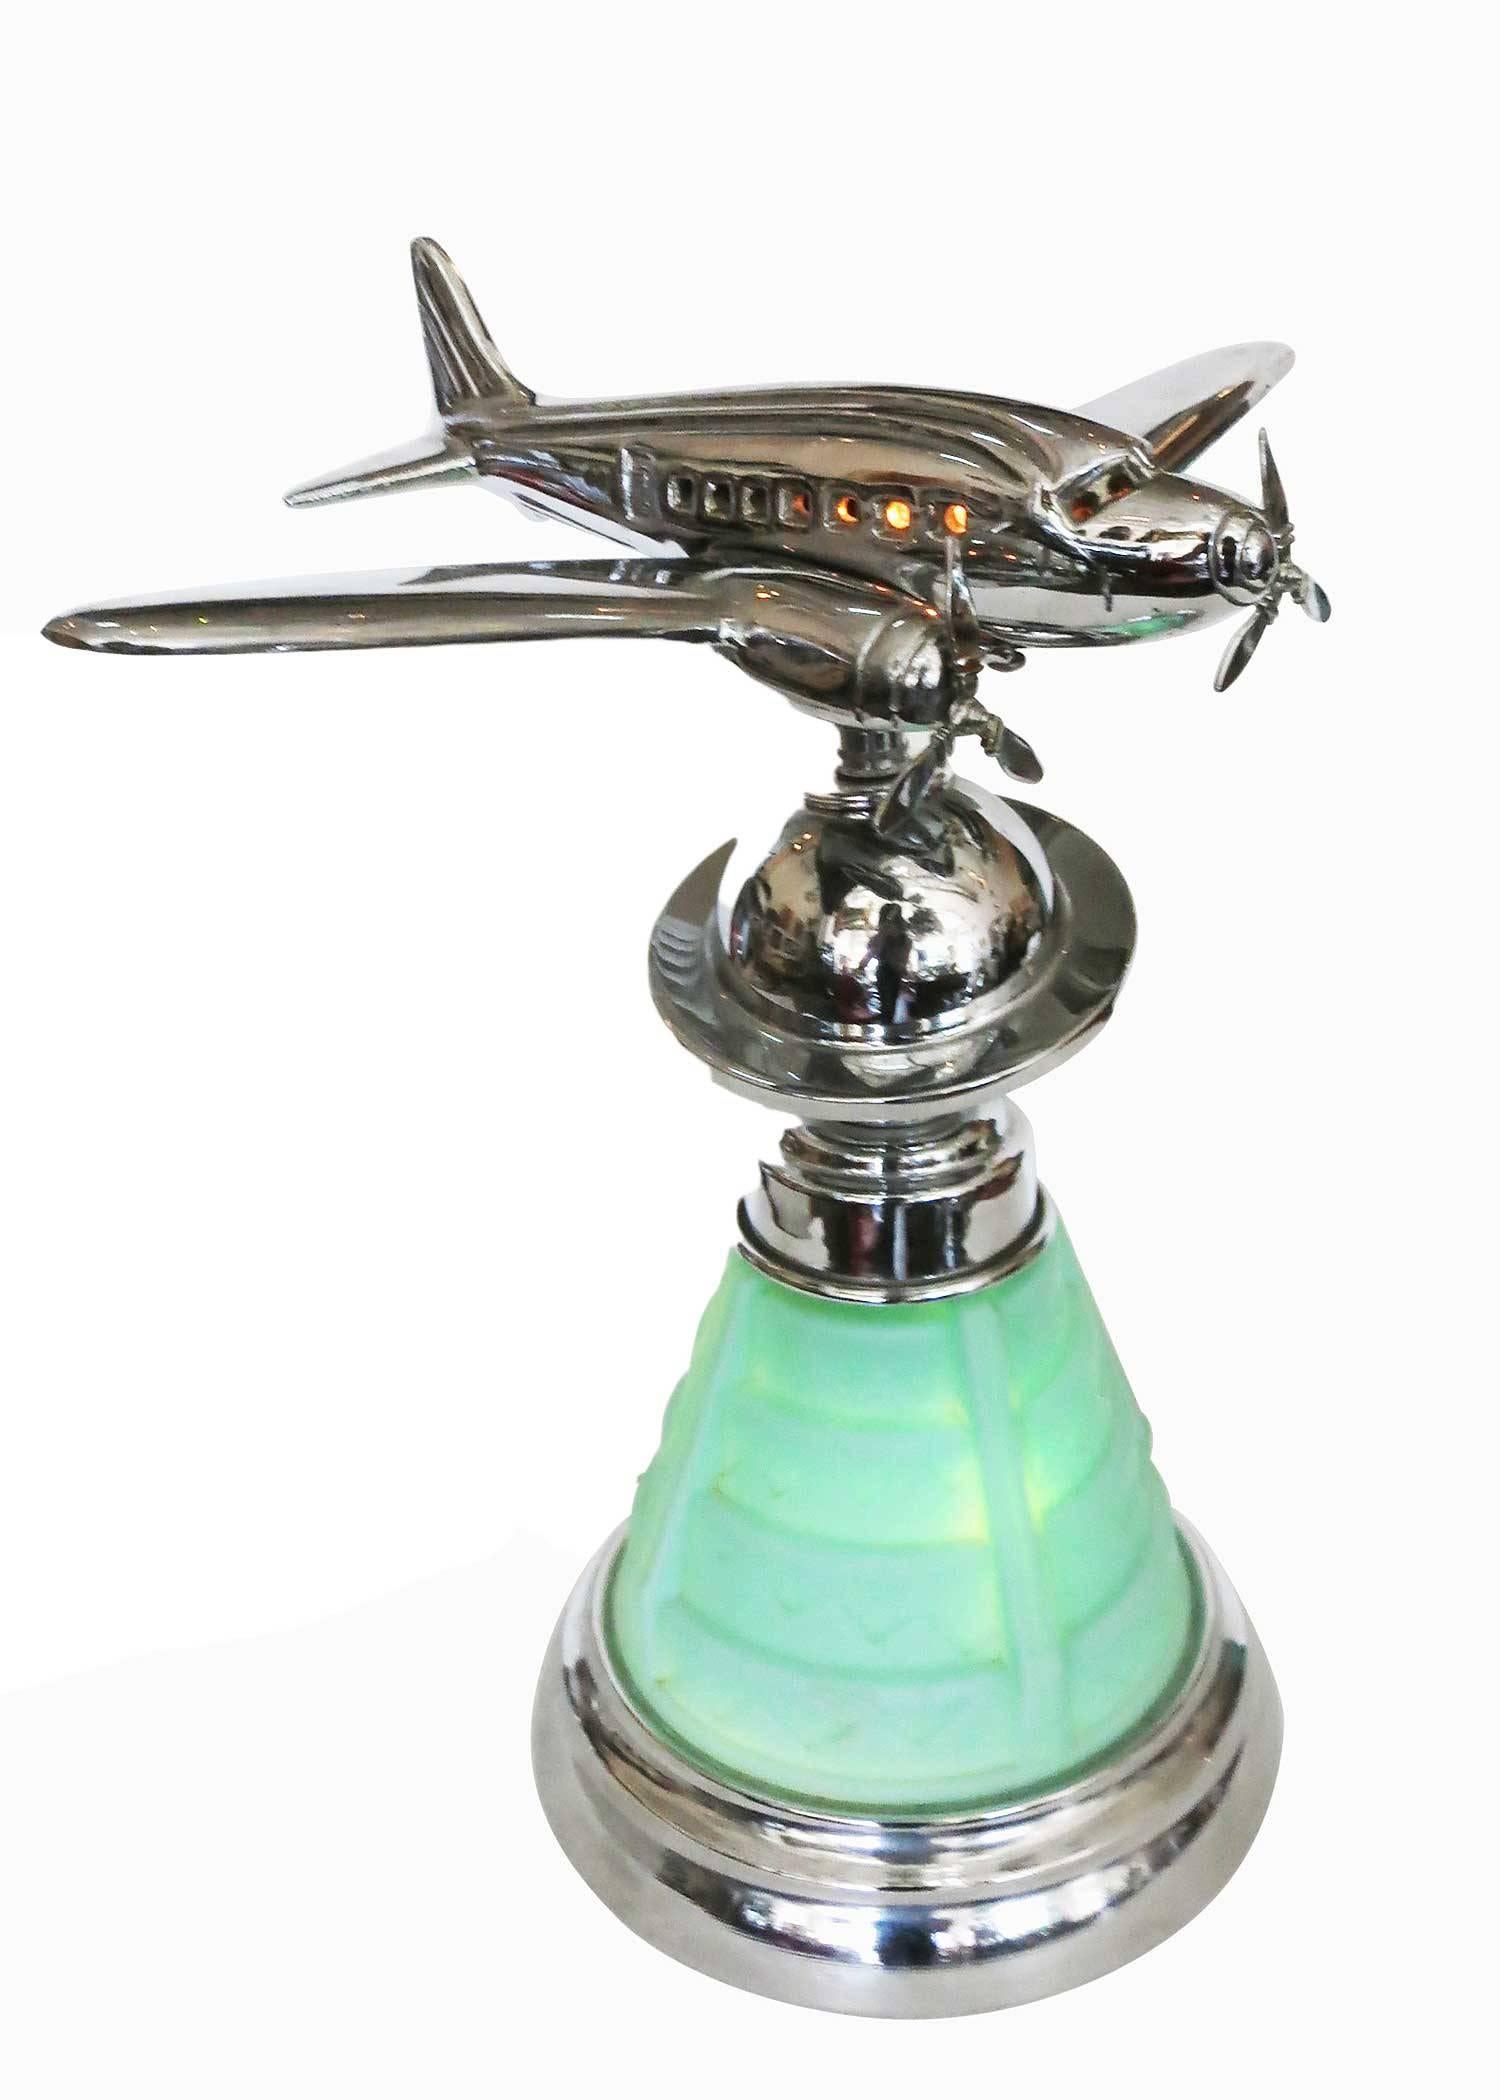 Custom chrome Douglas DC-2 airplane accent lamp, circa 1980. This lamp features a stepped Art Deco style light up green glass base with a chromed Saturn accent neck connecting to a chrome Douglas DC-2 airplane model that lights up.
    
    